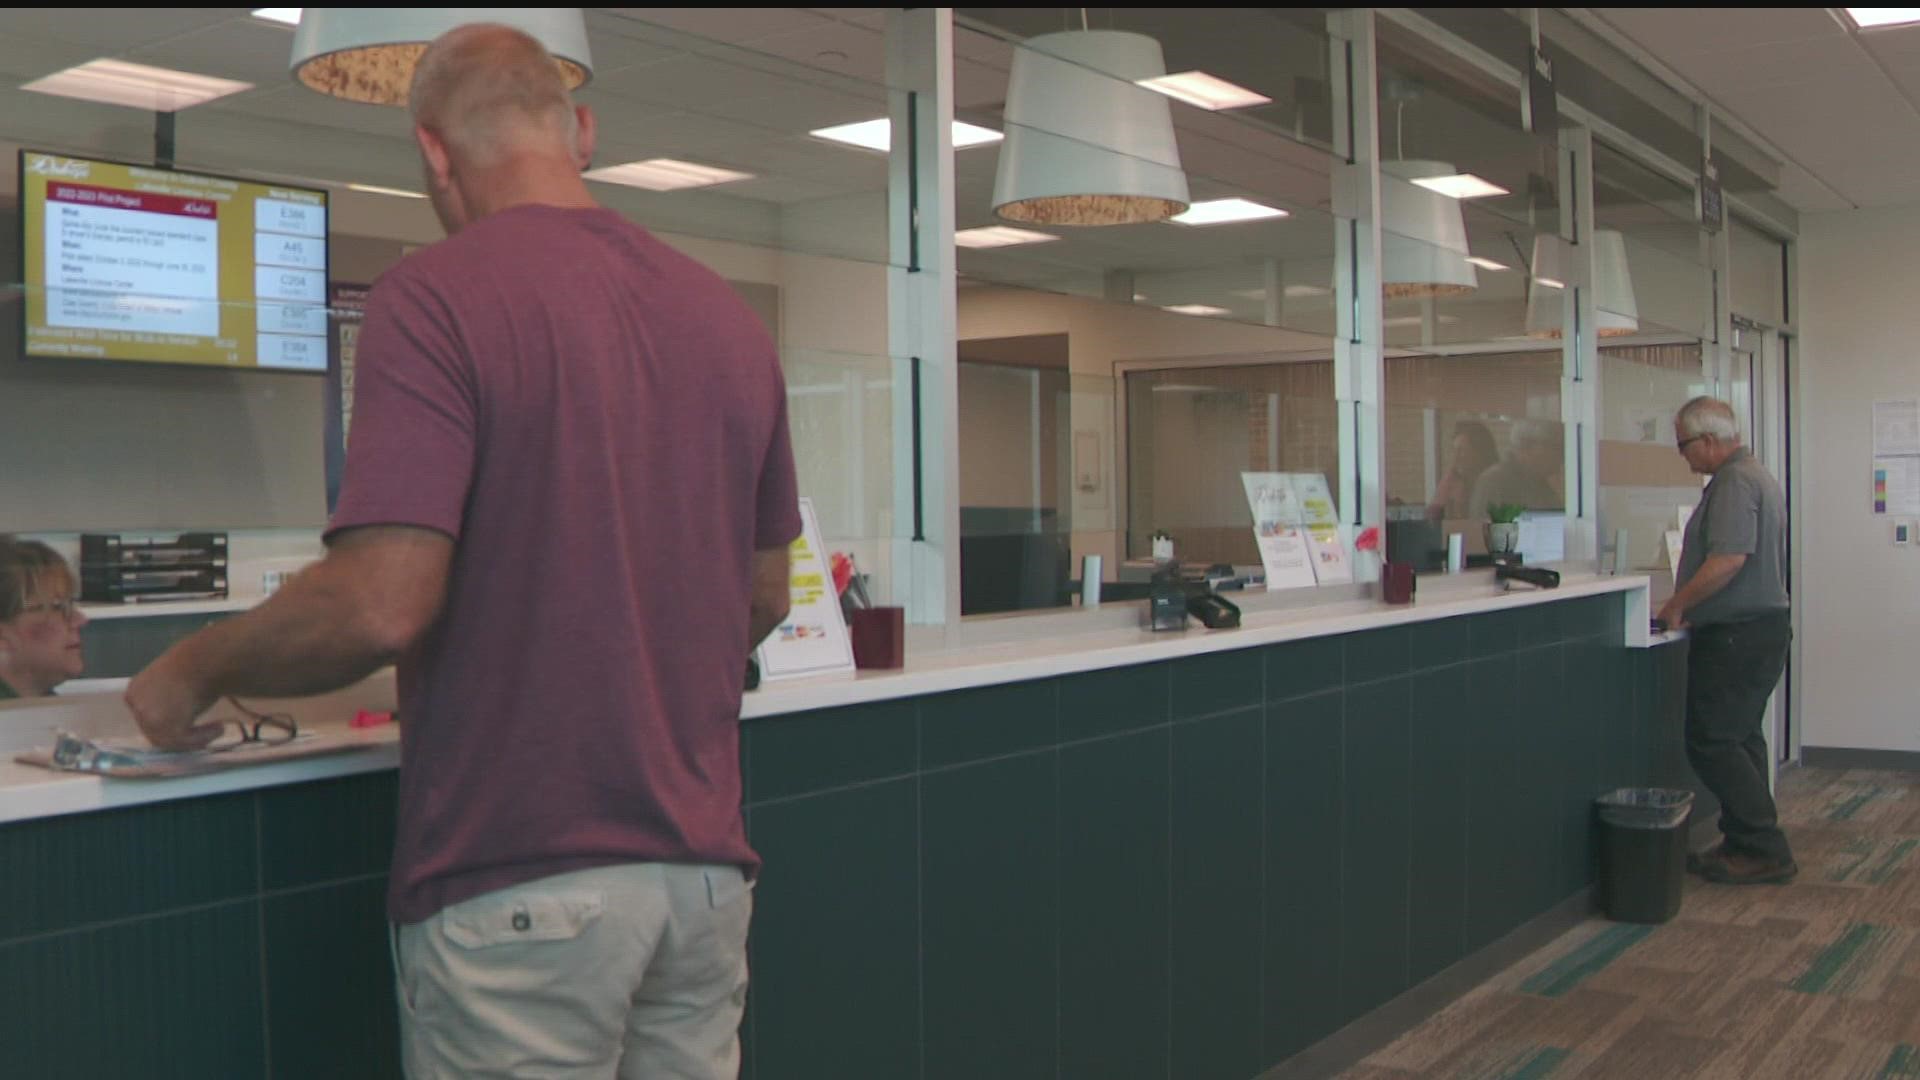 Now two DMV locations in Lakeville and Moorhead can quickly provide drivers licenses and Minnesotans are already taking advantage of the pilot program.